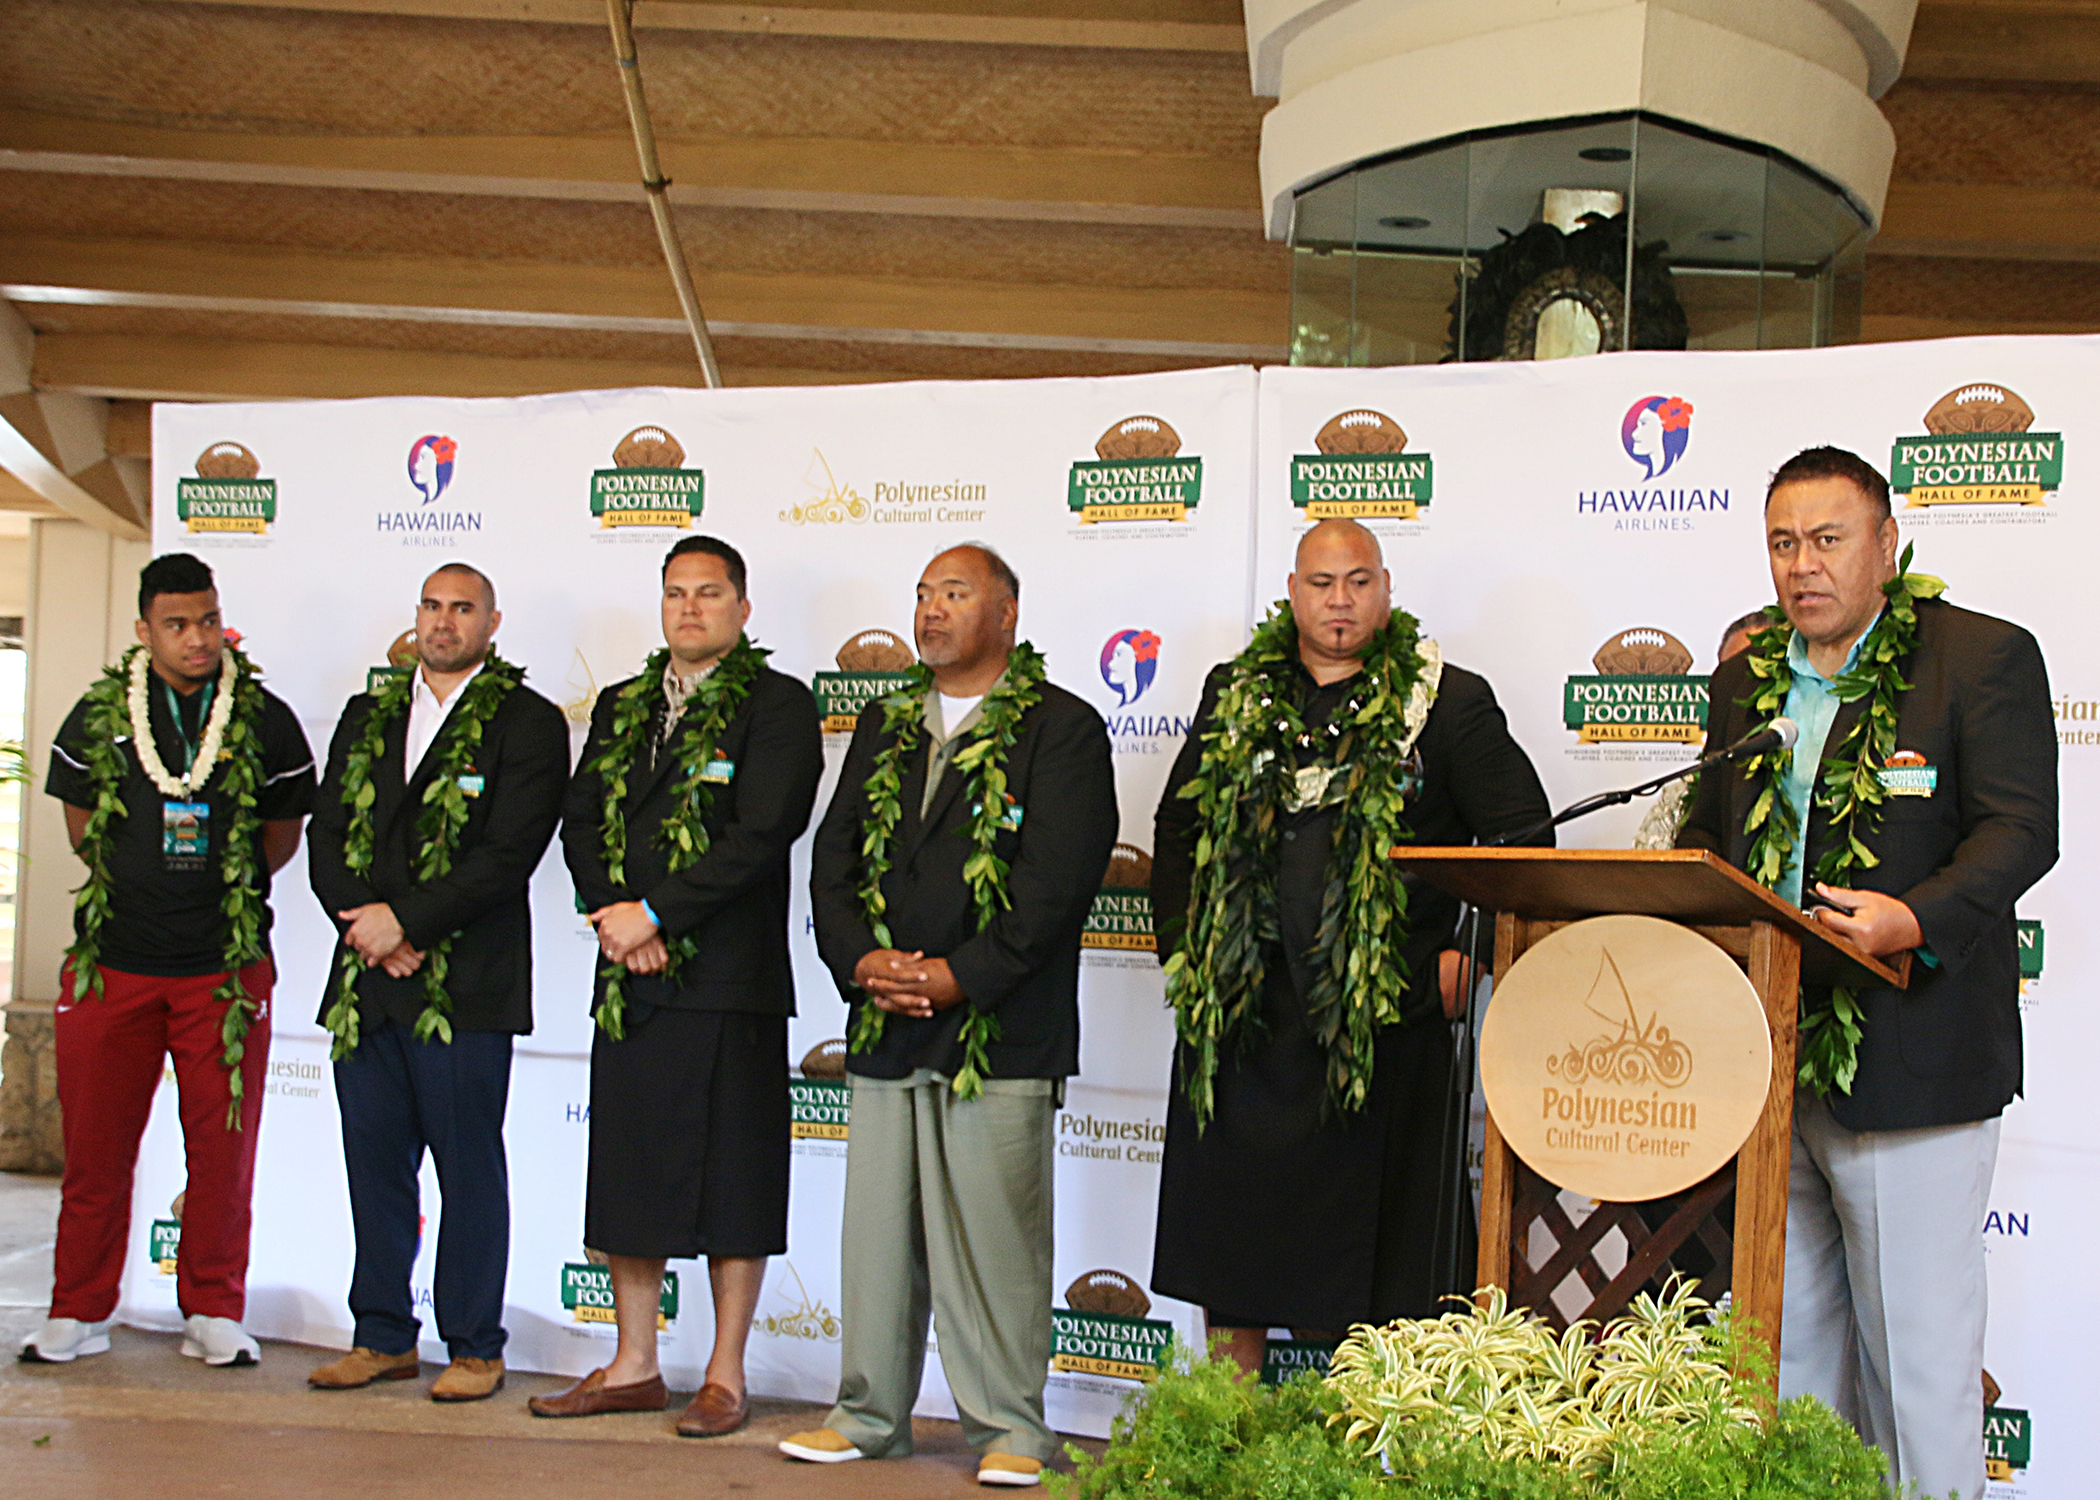 2019 inductees enshrined in Polynesian Football Hall of Fame at PCC